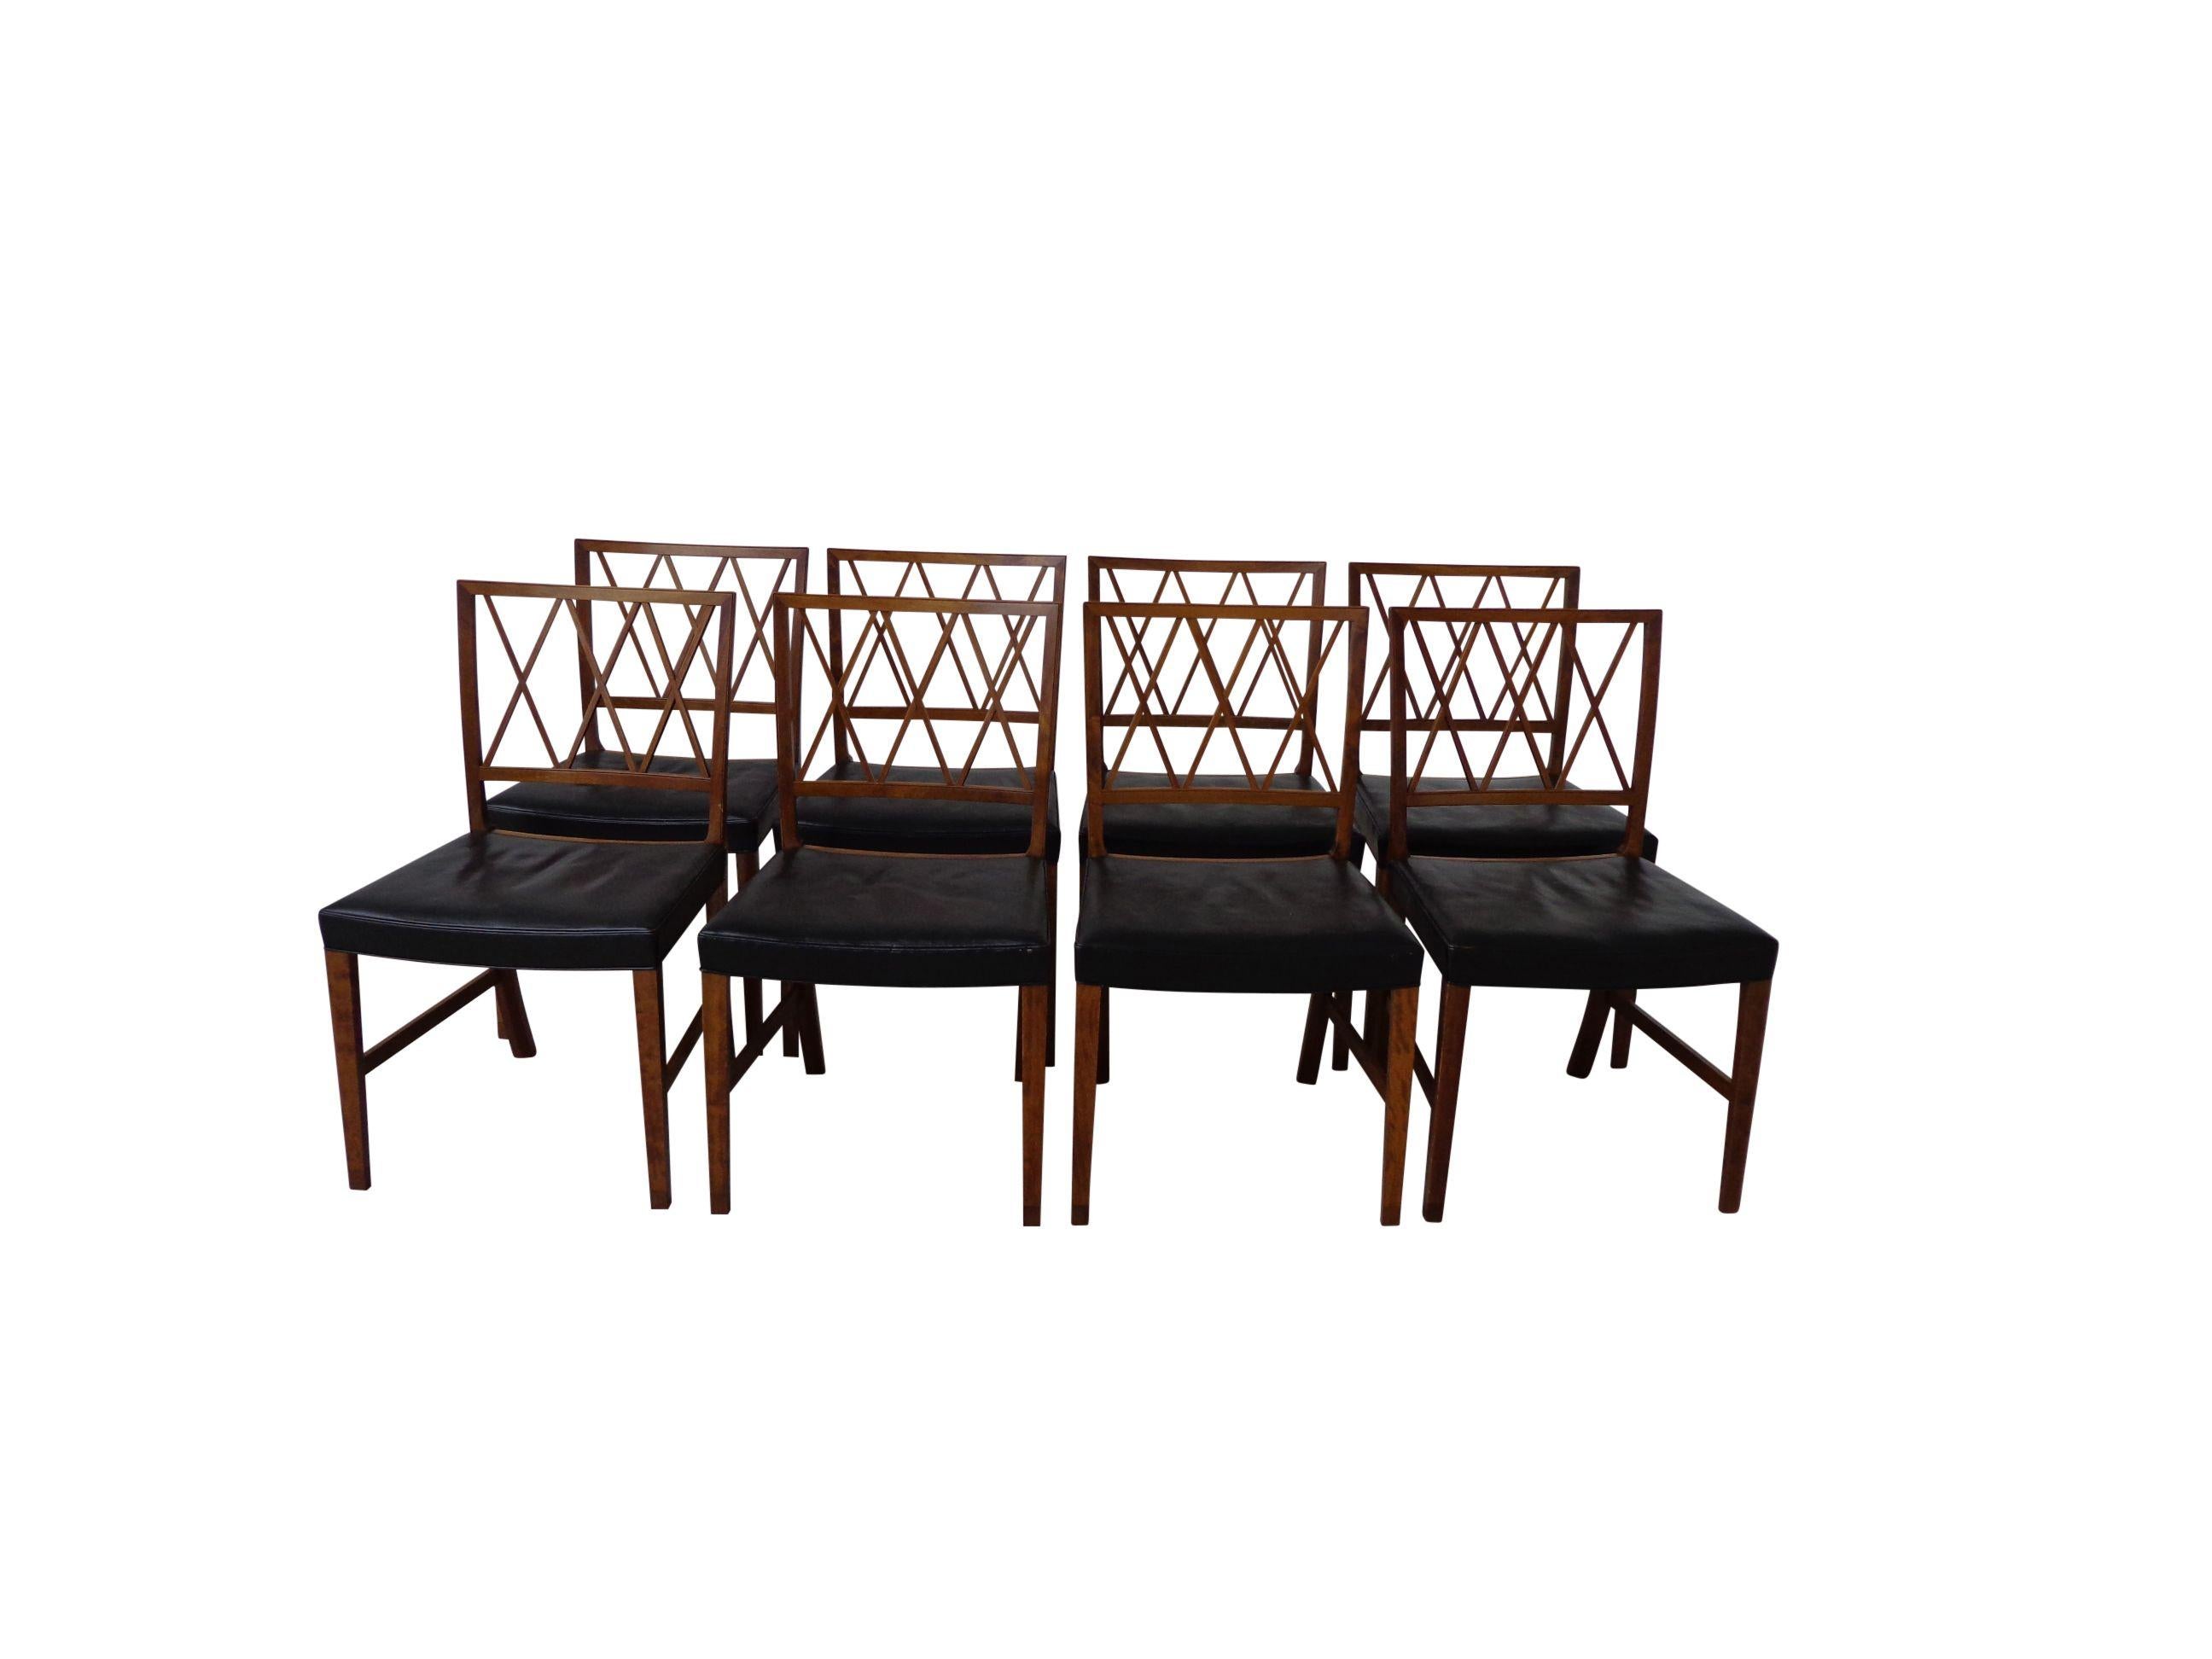 A elegant matching set of eight Ole Wanscher dining chairs upholstered in original black leather and beautiful patinated. Frame made of mahogany and shoes in rosewood. These chairs show the great craftsmanship and attention to detail that Ole